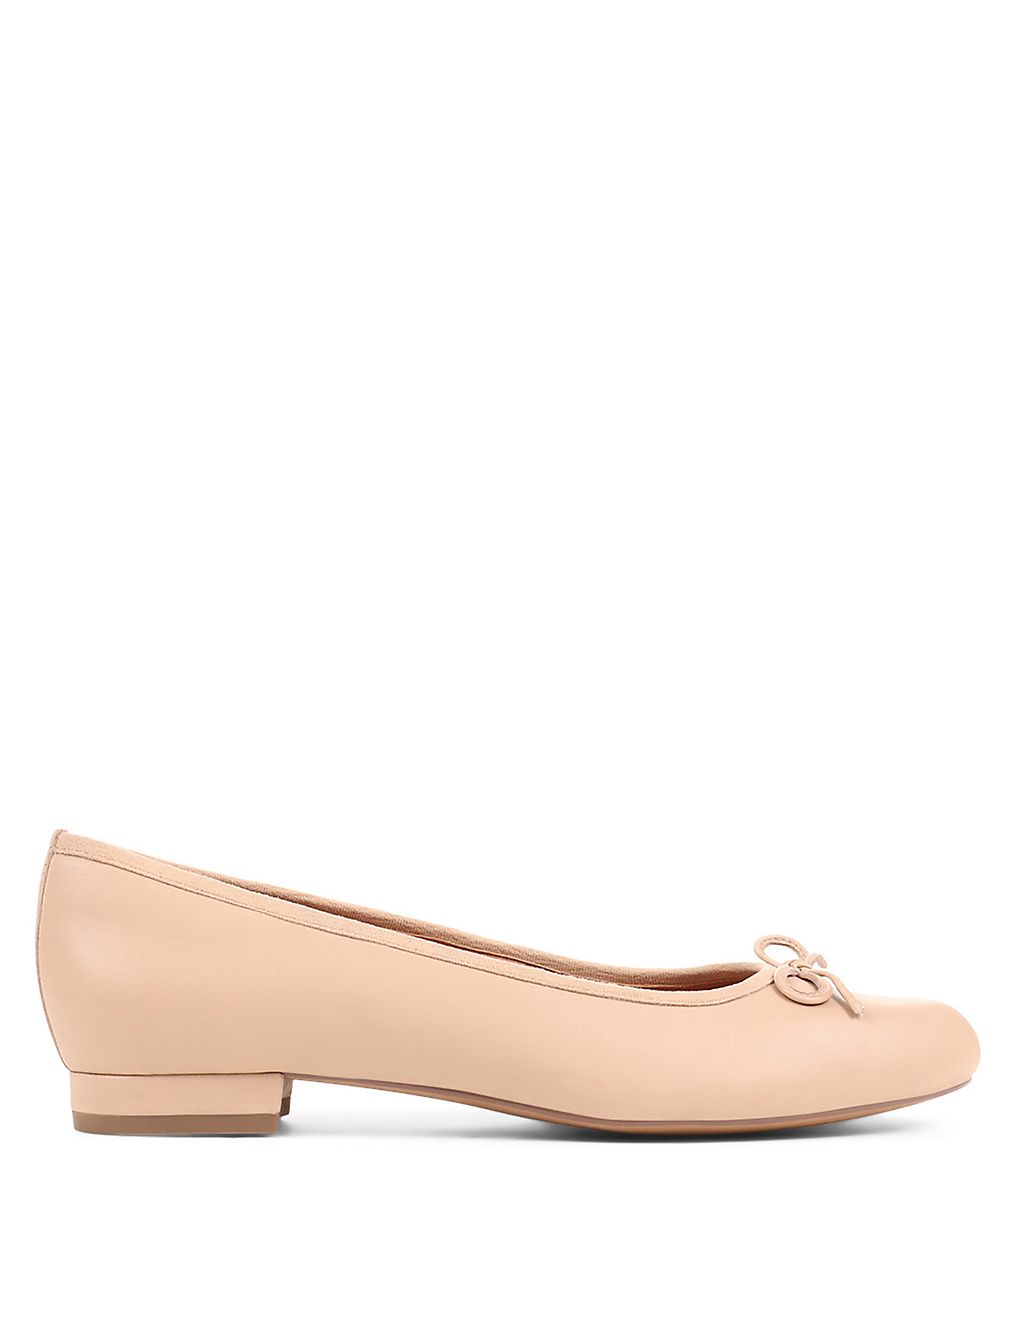 Leather Flat Ballet Pumps 4 of 7